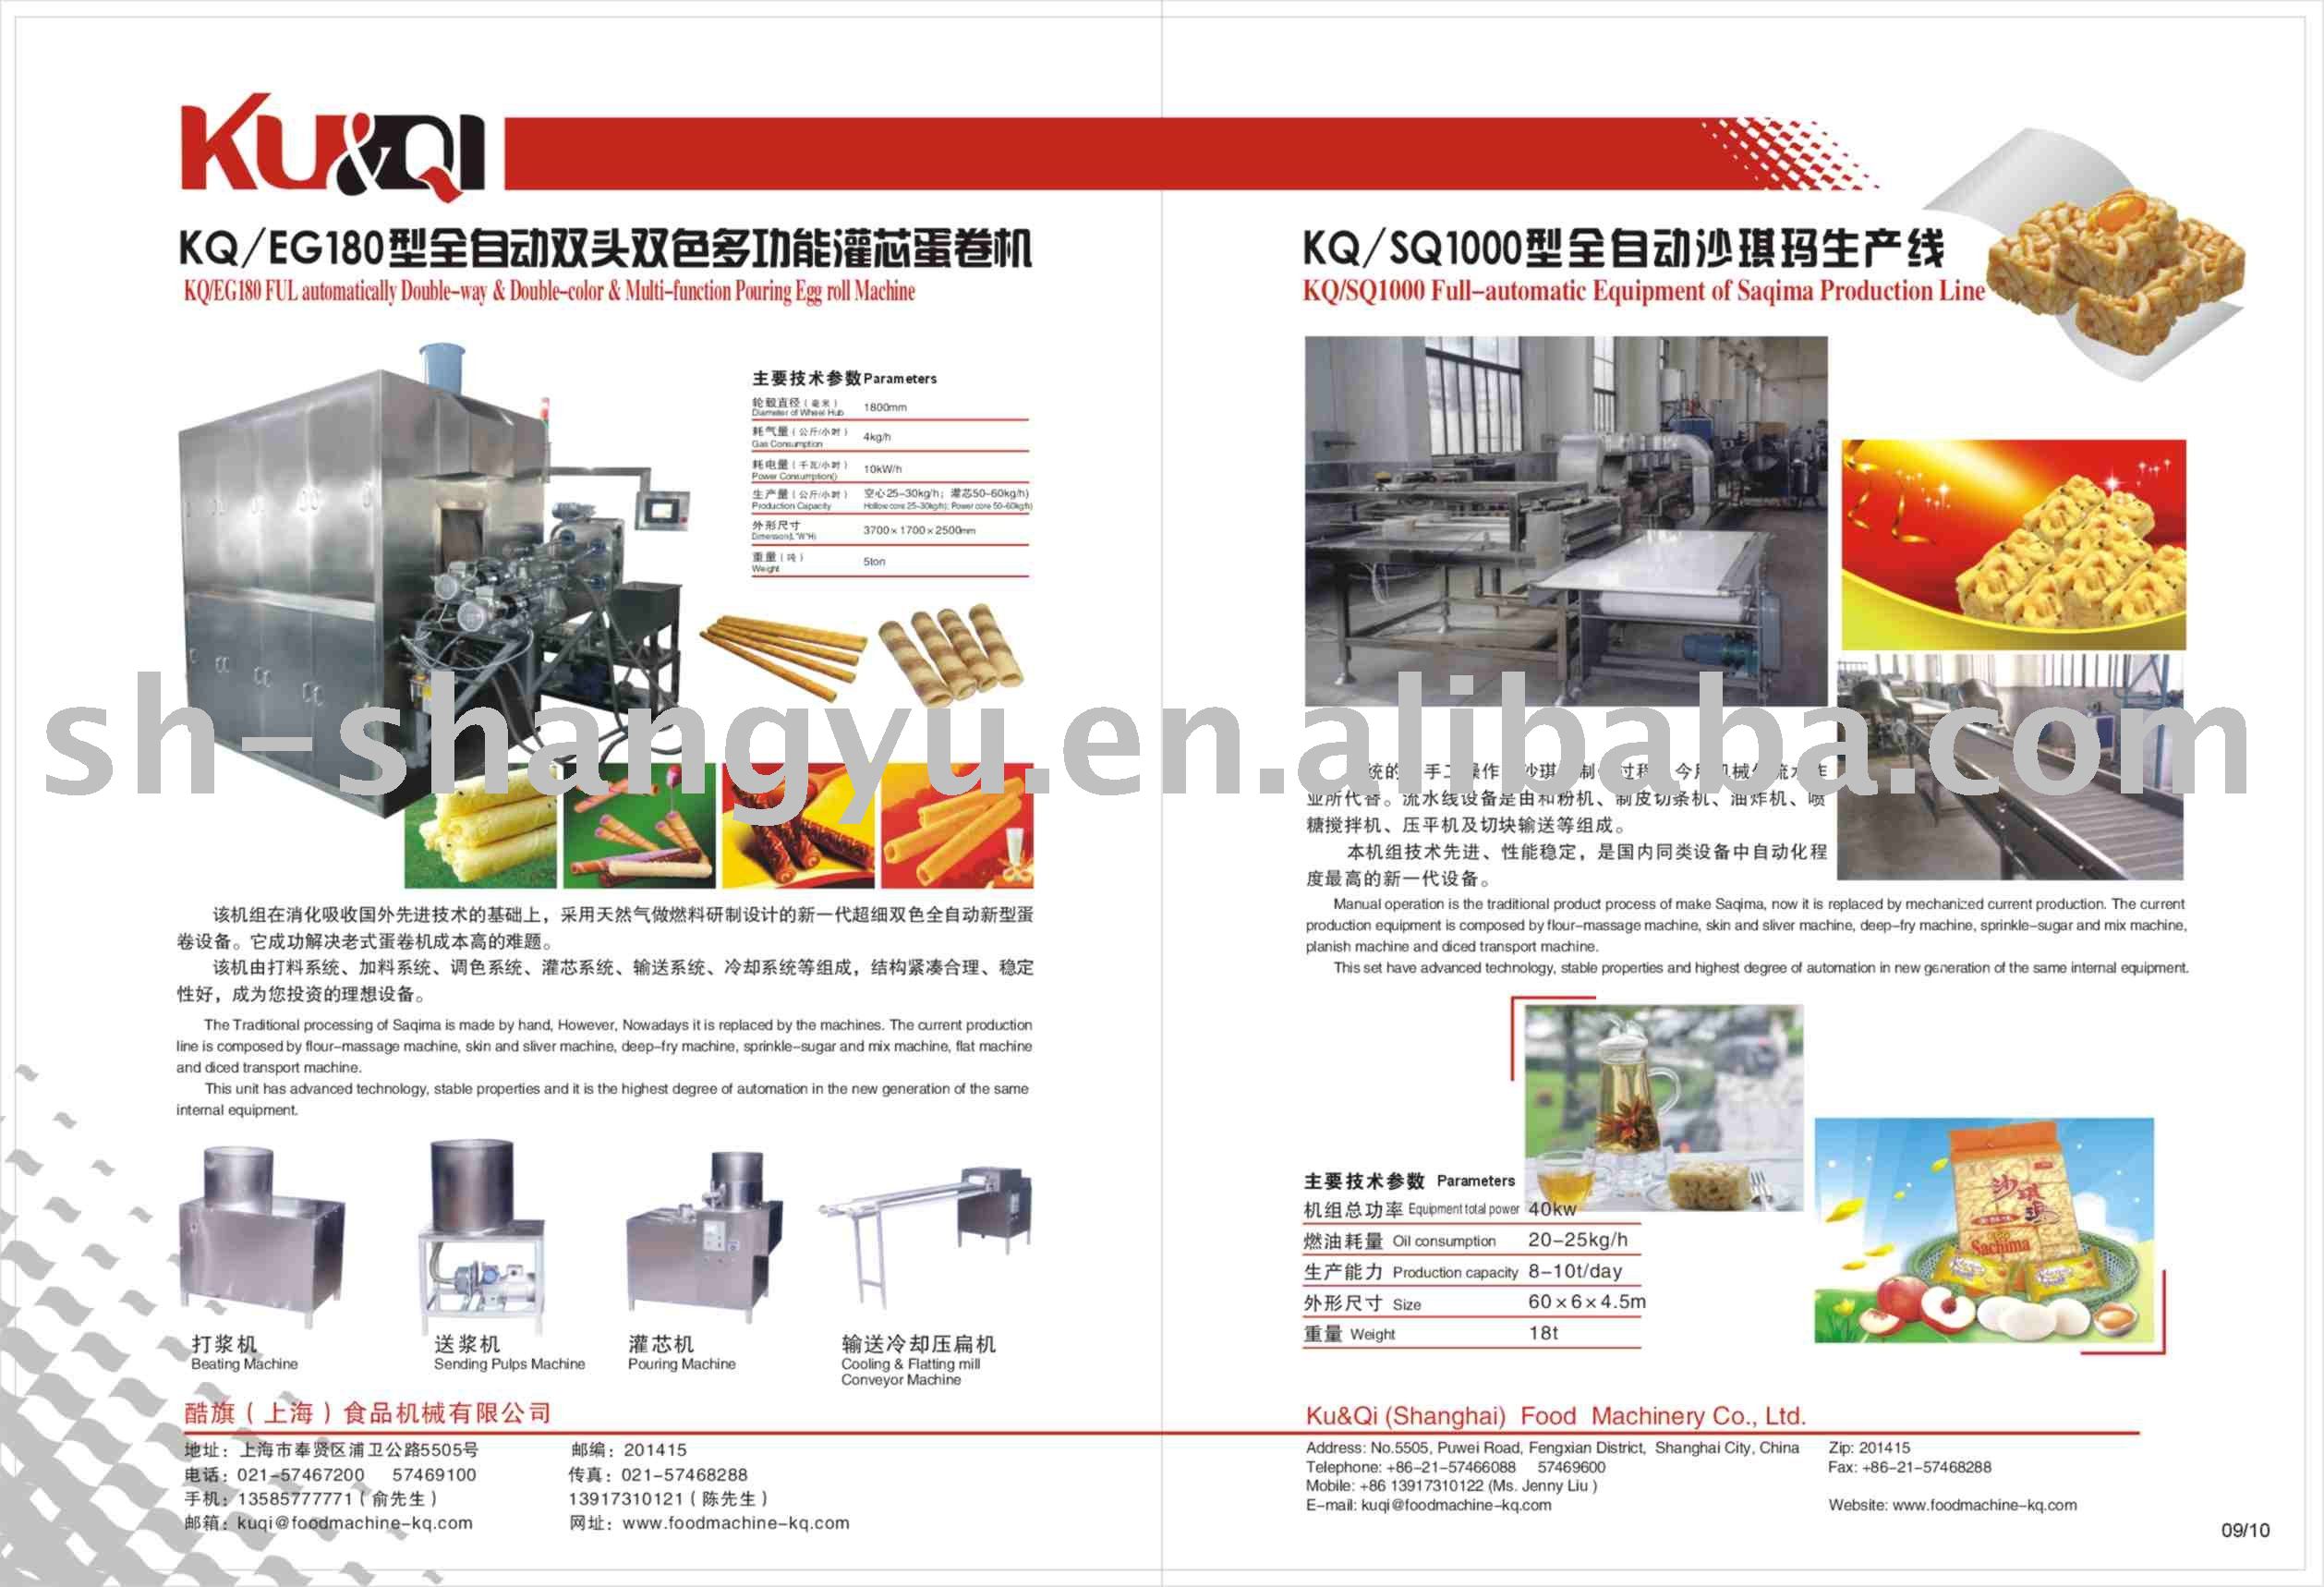 KQ/EG-180 Multi-function Egg Roll Machinery Made In China